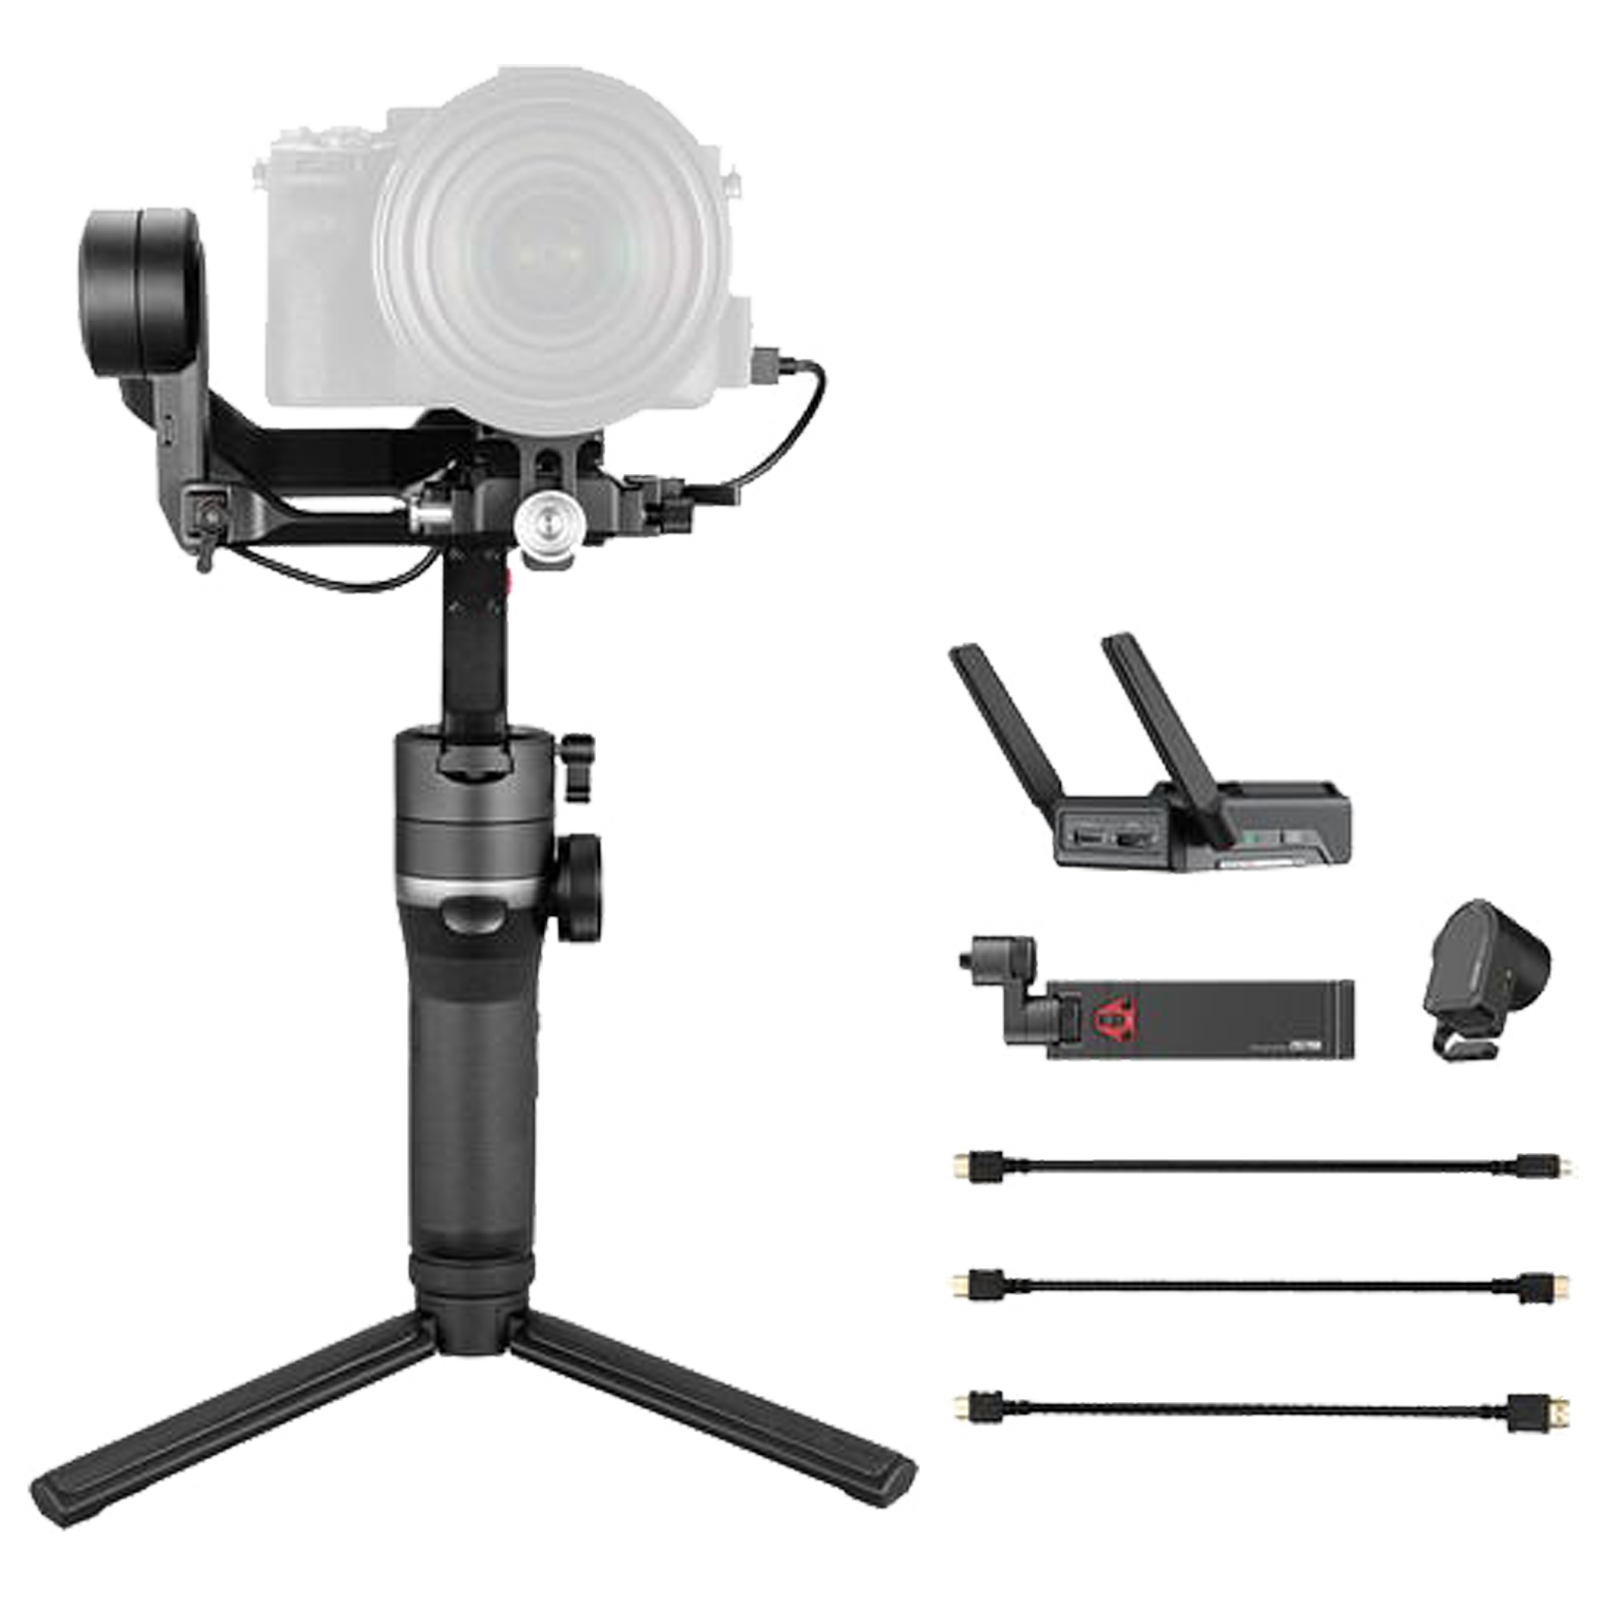 Zhiyun Weebill-S Image Transmission Pro 3-Axis Gimble for Camera (ViaTouch 2.0 Control System, Black)